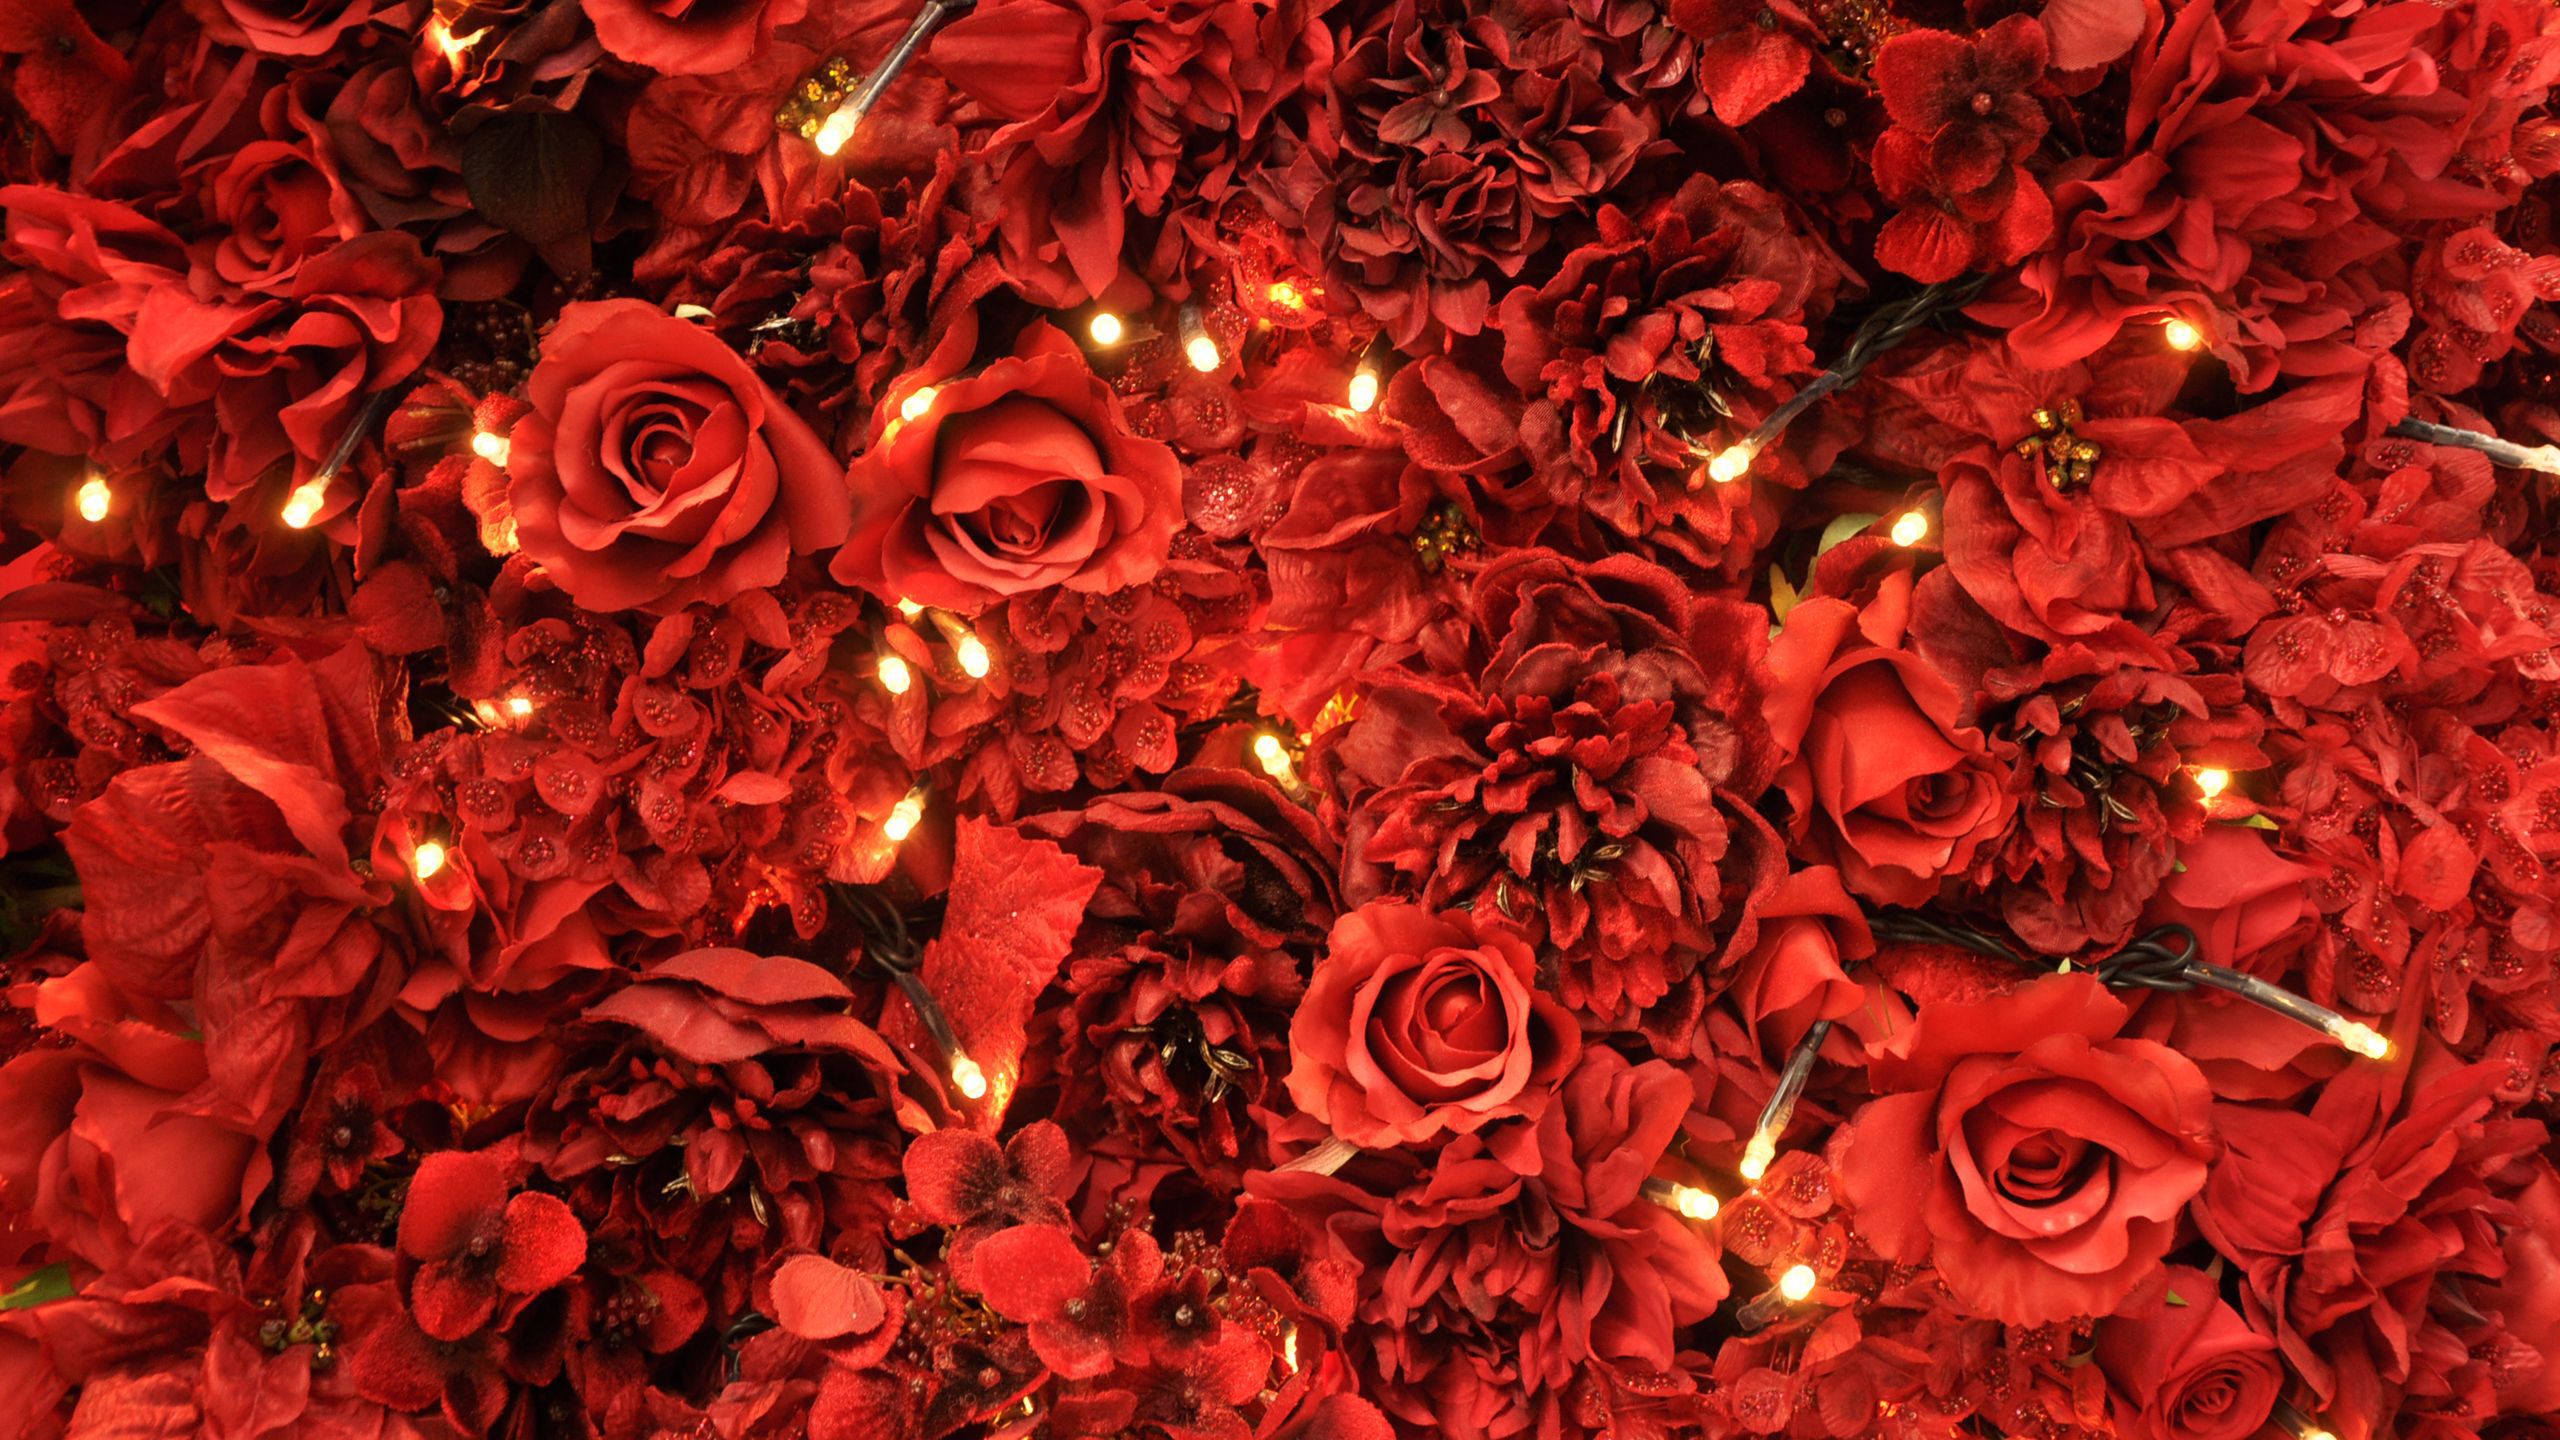 Red Hintergrundbild 2560x1440. Red Roses And Lights HD Red Aesthetic Wallpaper